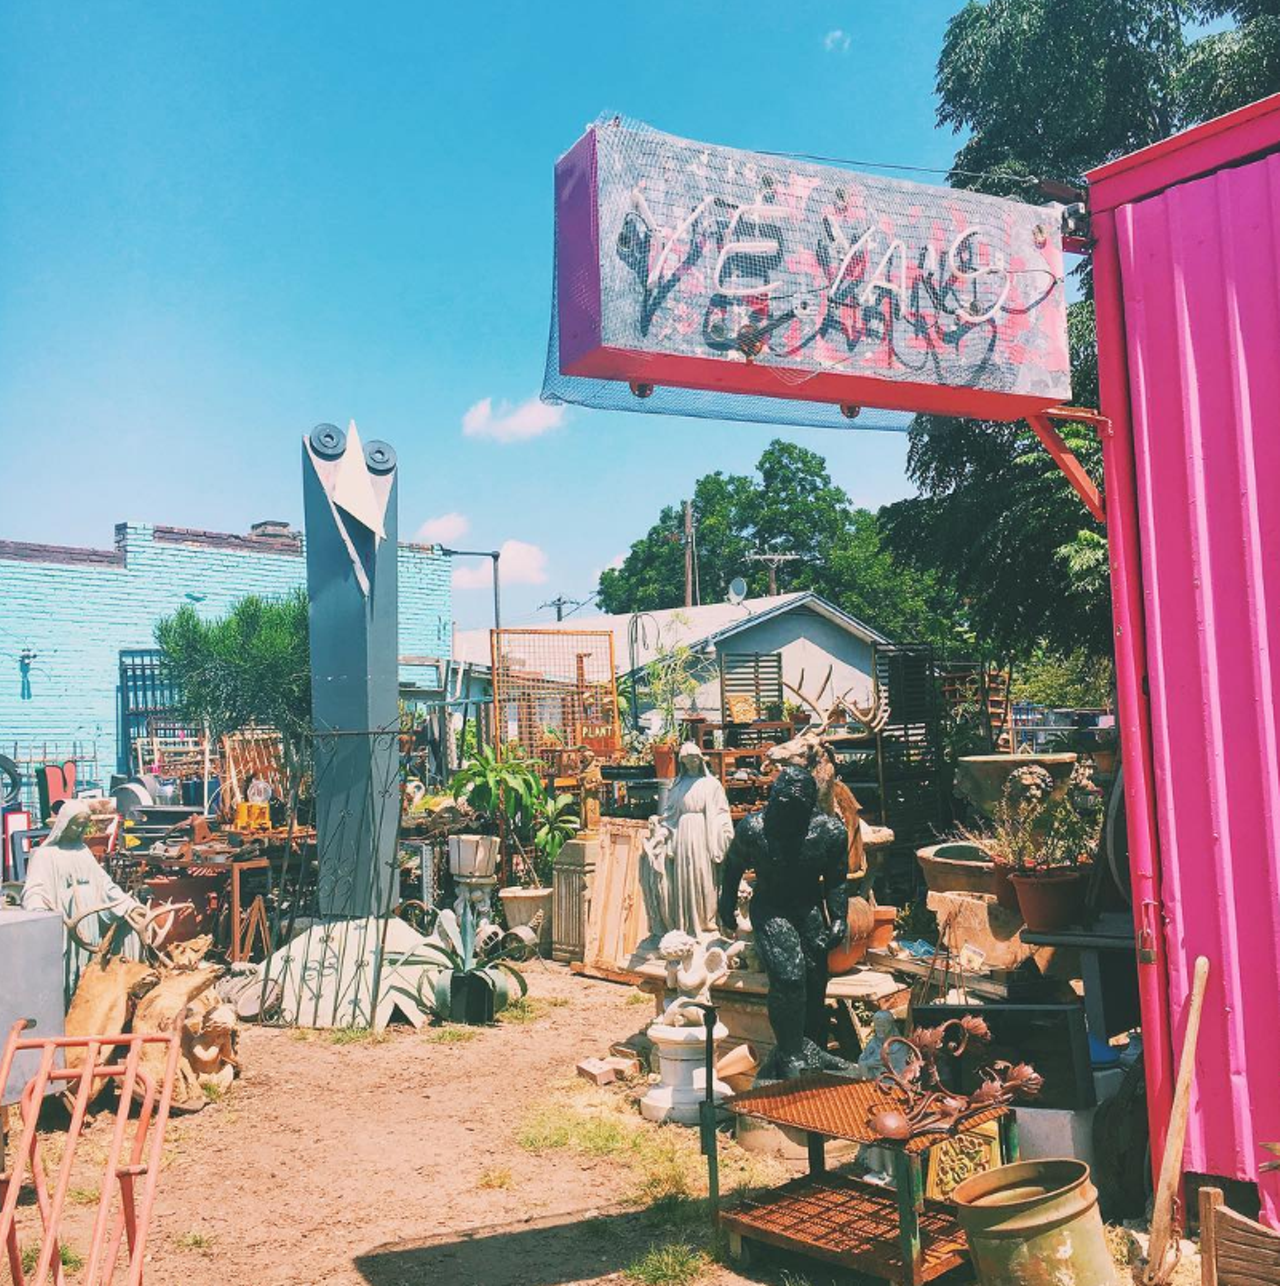 Yeya&#146;s Antiques and Oddities
1423 E  Commerce St, (210) 827-5555
Each item in this eclectic shop is entirely its own, one of a kind. For the boldest seekers of original furnishings and more--think vintage dismembered dolls--, take a trip to this crazy spot. 
Instagram/ @megtayler